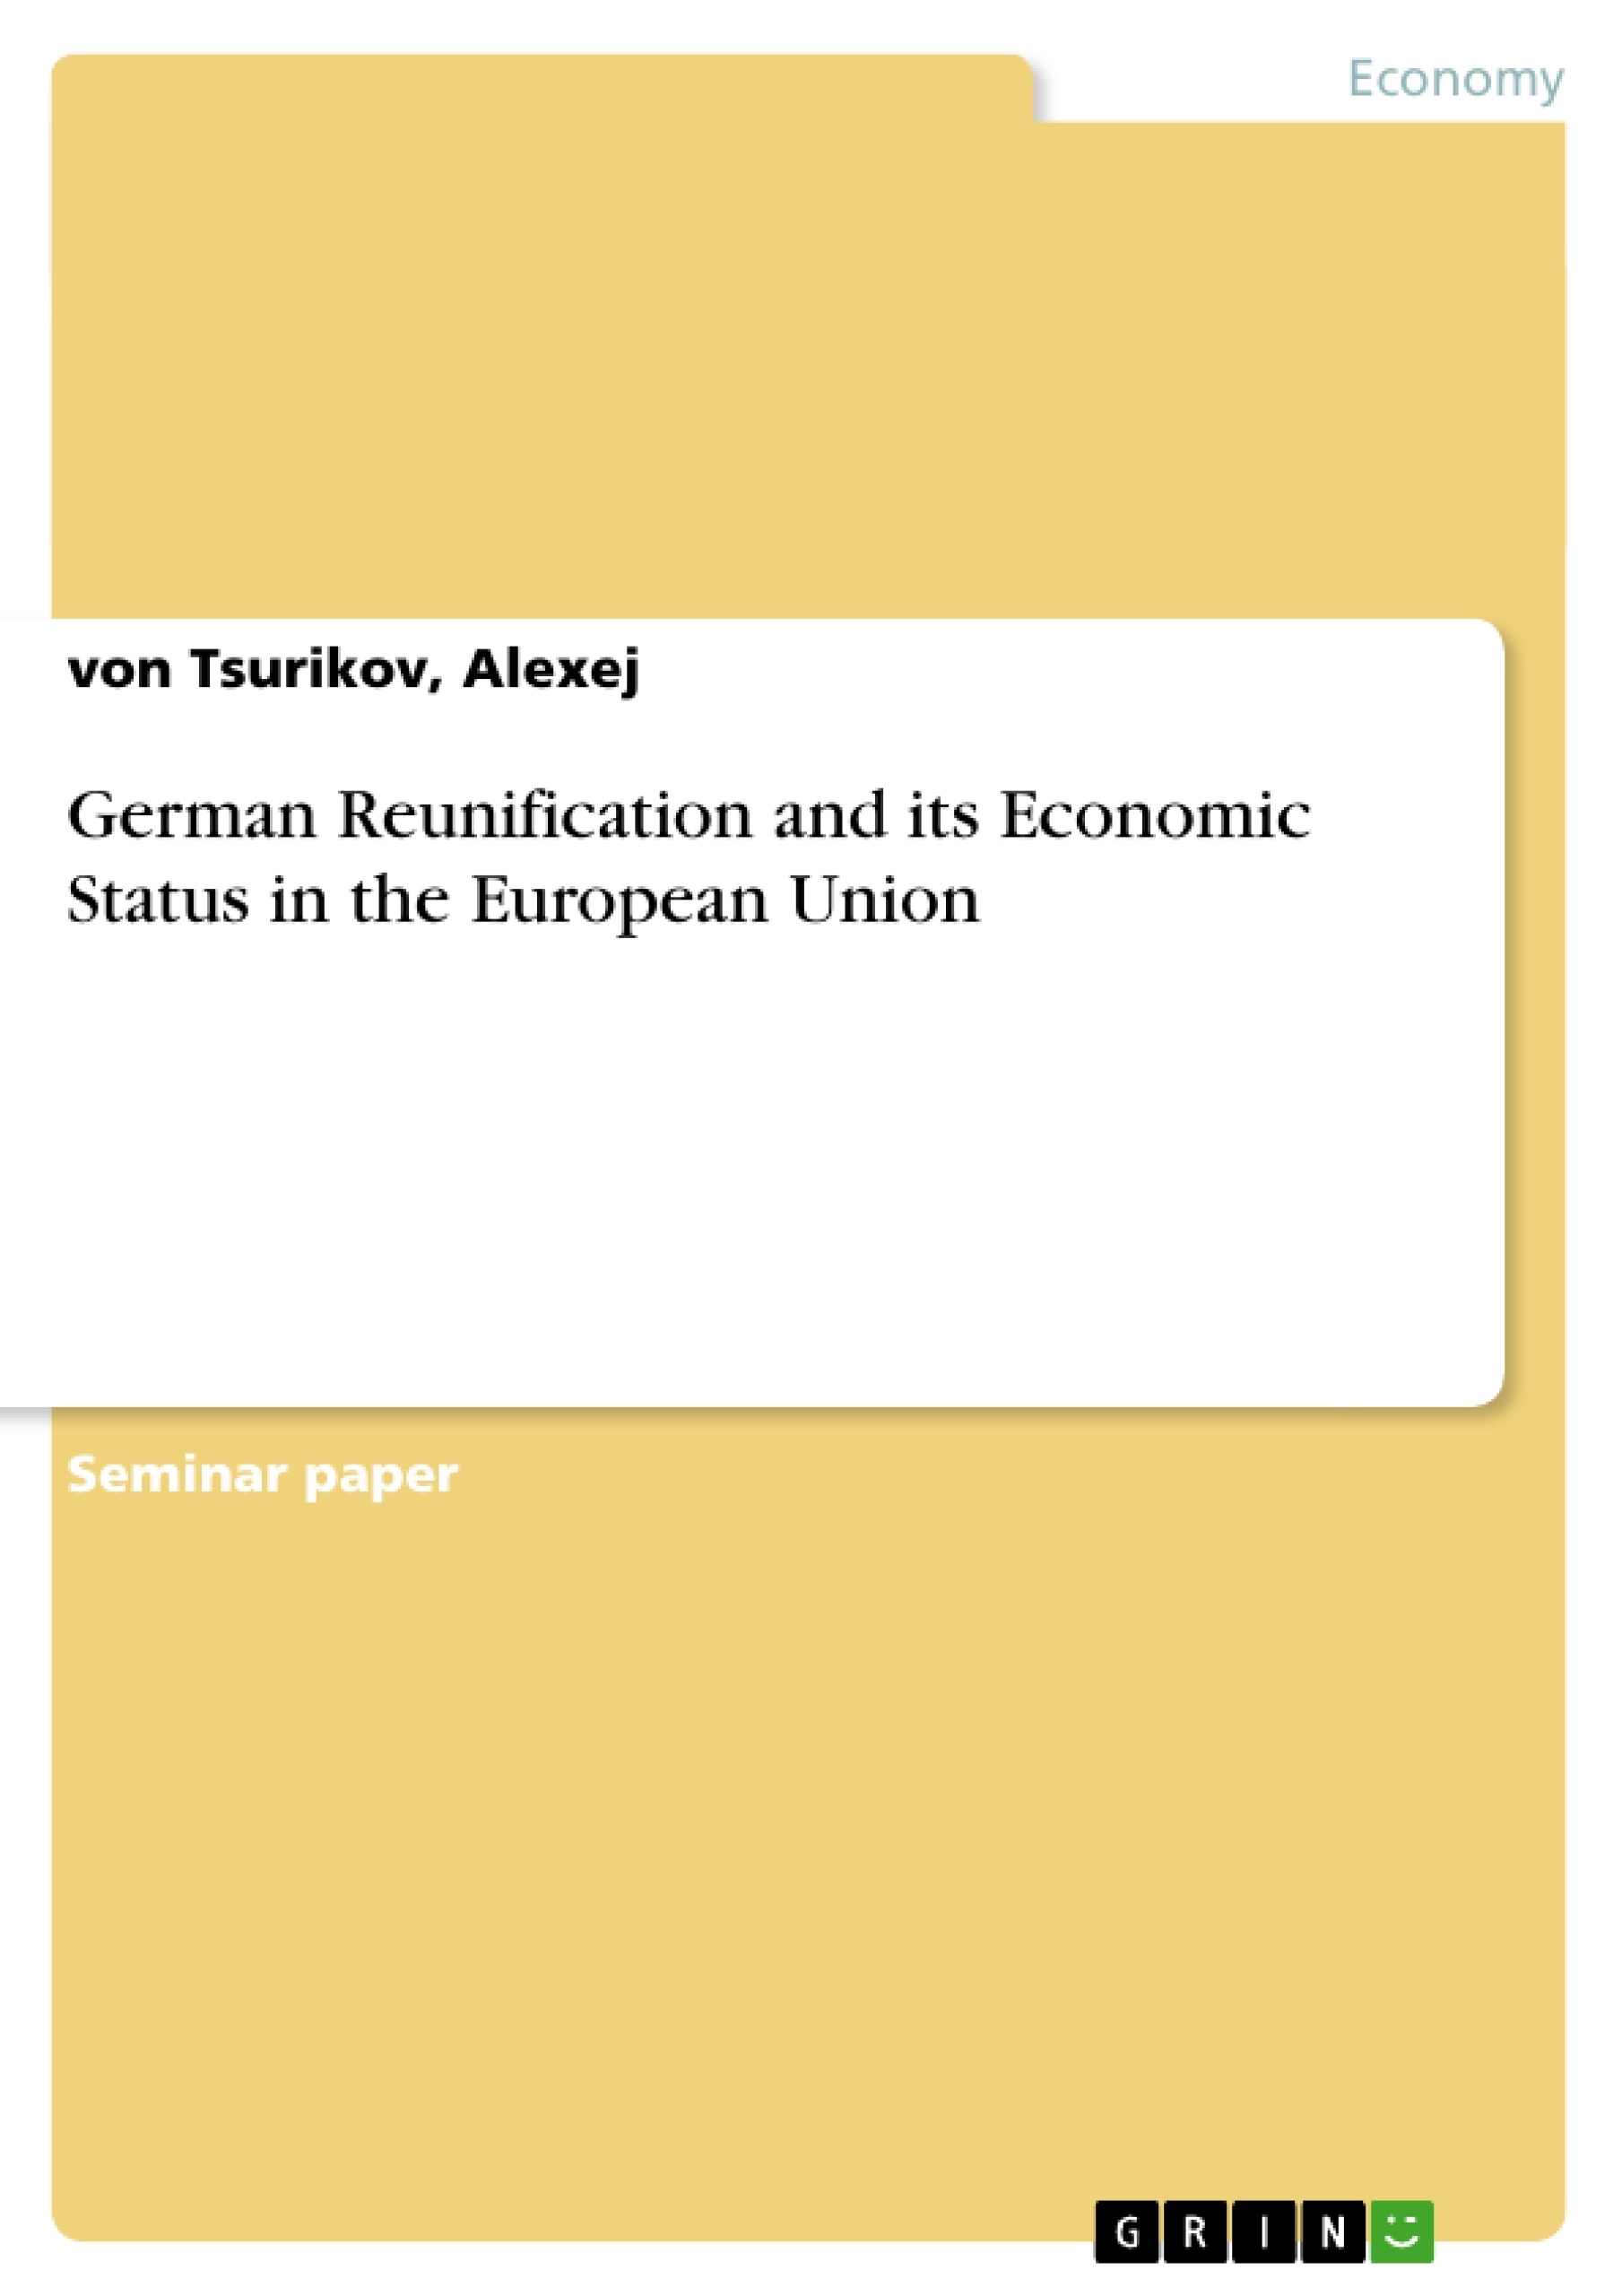 Título: German Reunification and its Economic Status in the European Union